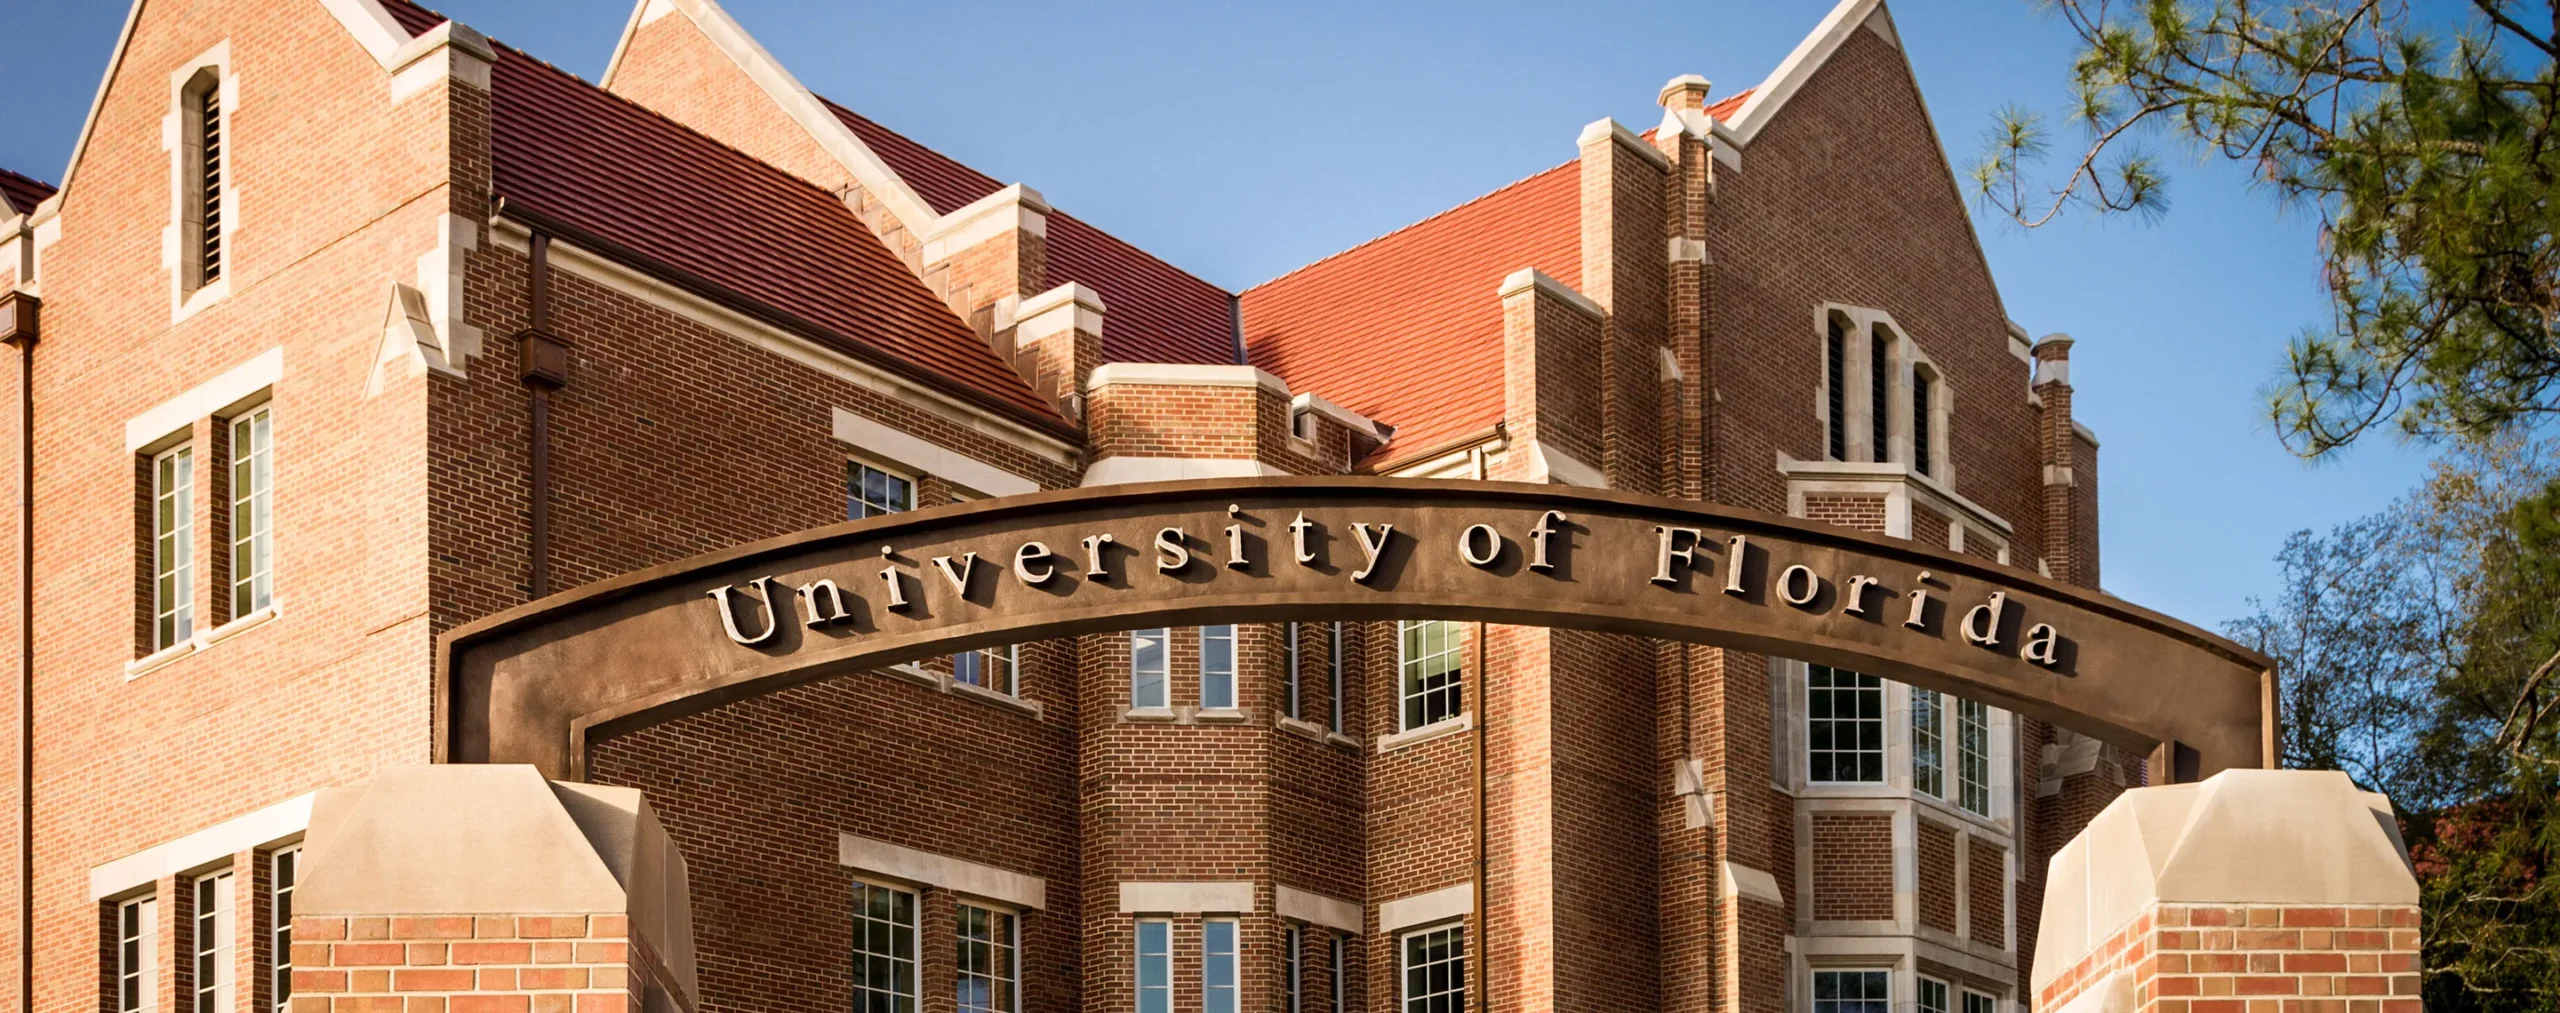 University of Florida Acceptance Rate Out of State